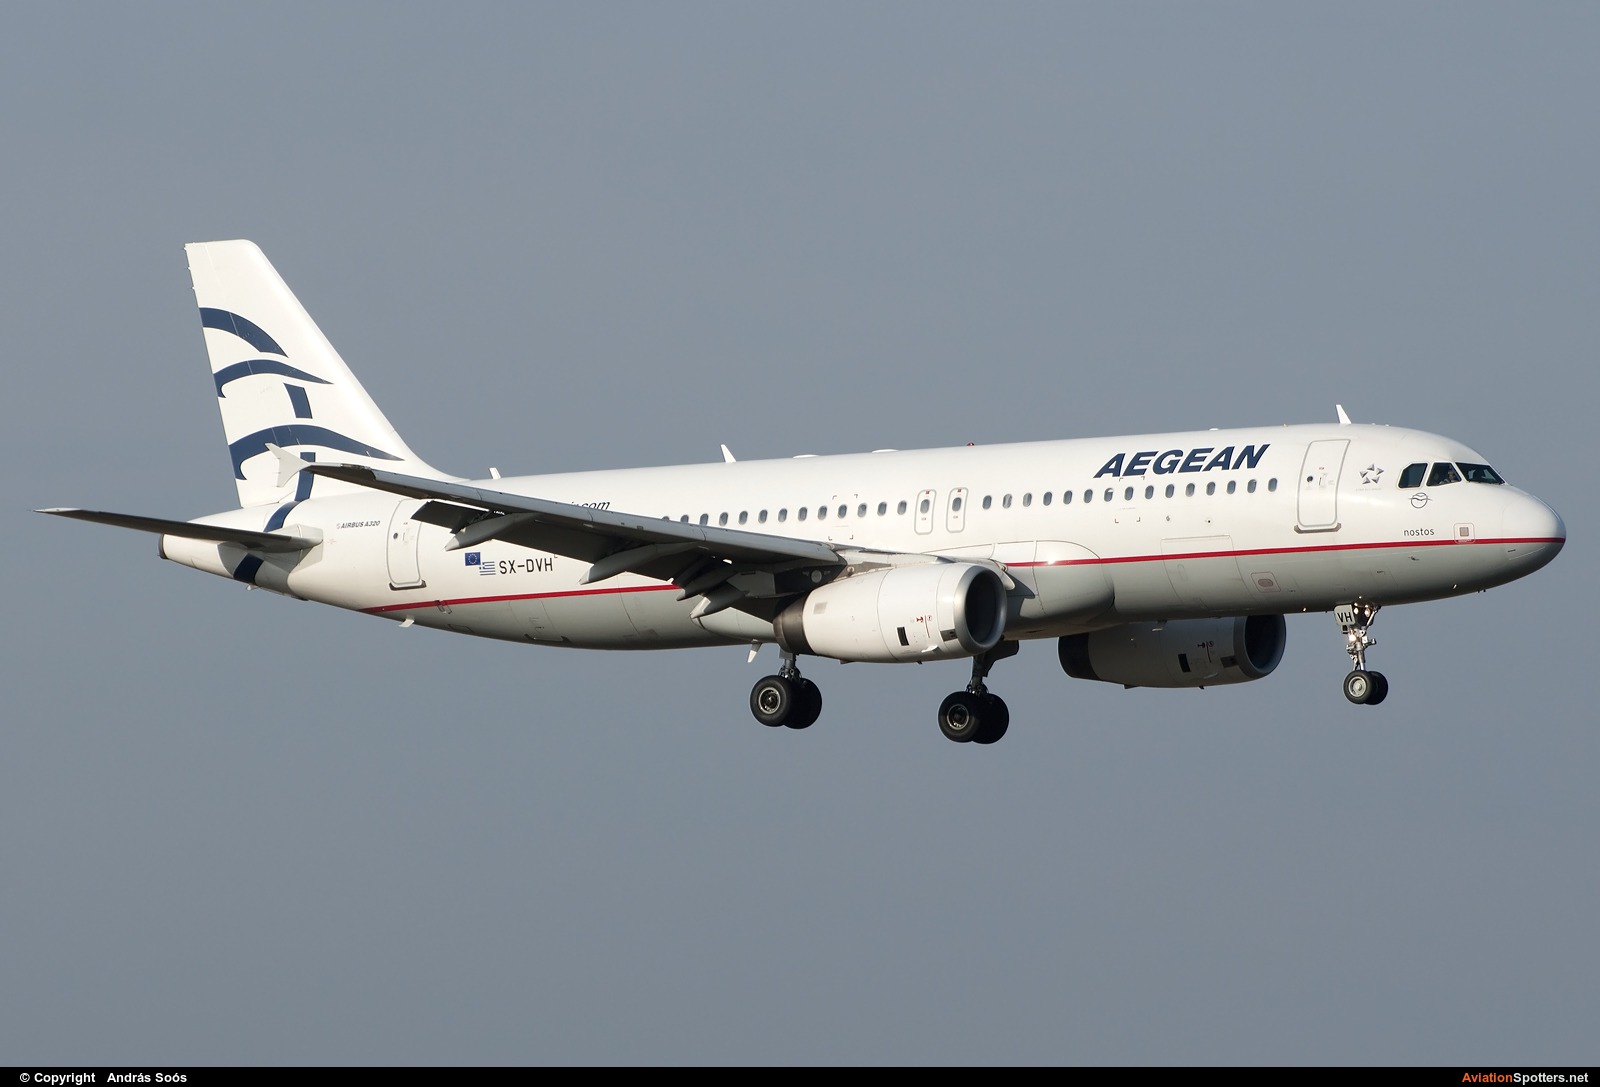 Aegean Airlines  -  A320  (SX-DVH) By András Soós (sas1965)